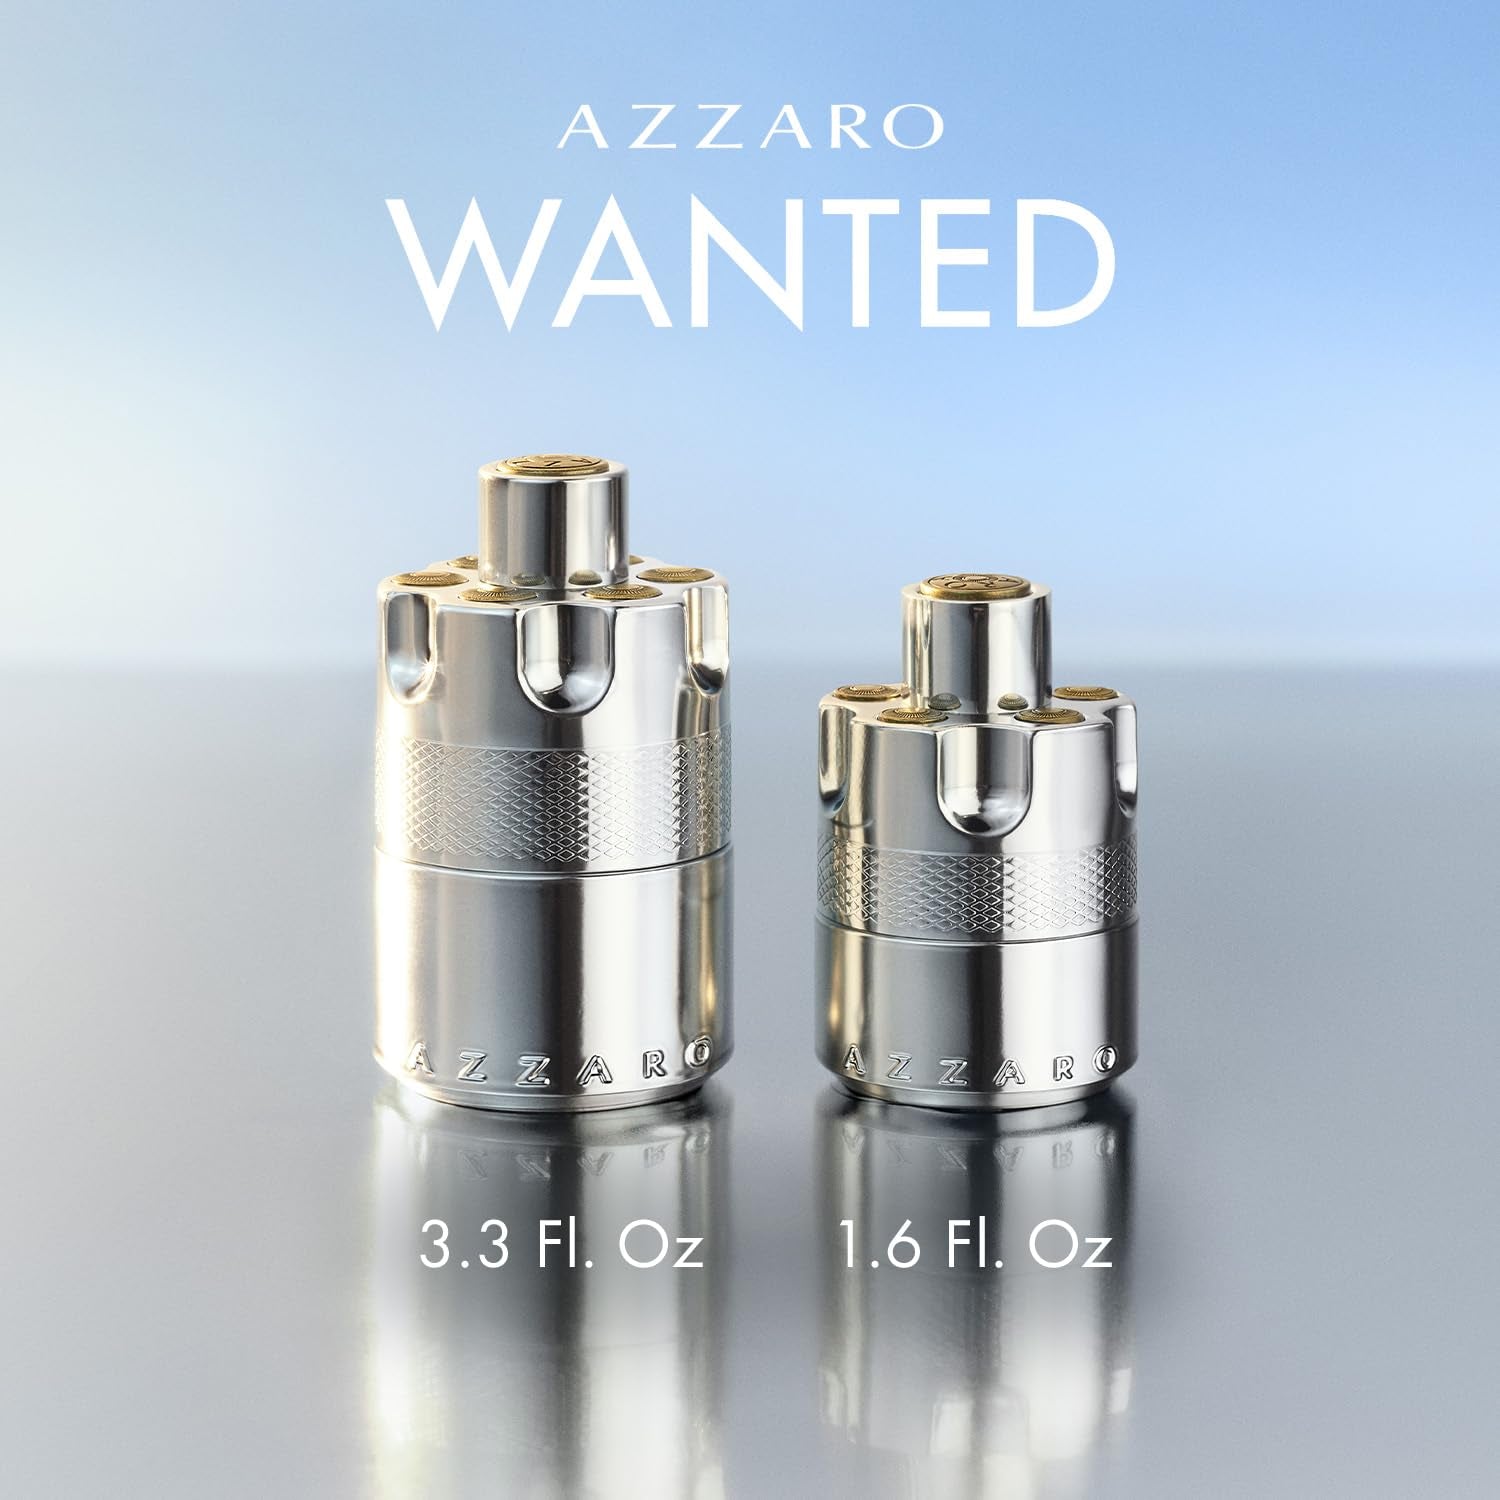 Wanted Eau de Parfum - Energizing & Intense Mens Cologne - Woody, Aromatic & Spicy Fragrance - Fresh Notes of Juniper Berries, Sage, Vetiver - Lasting Wear - Luxury Perfumes for Men